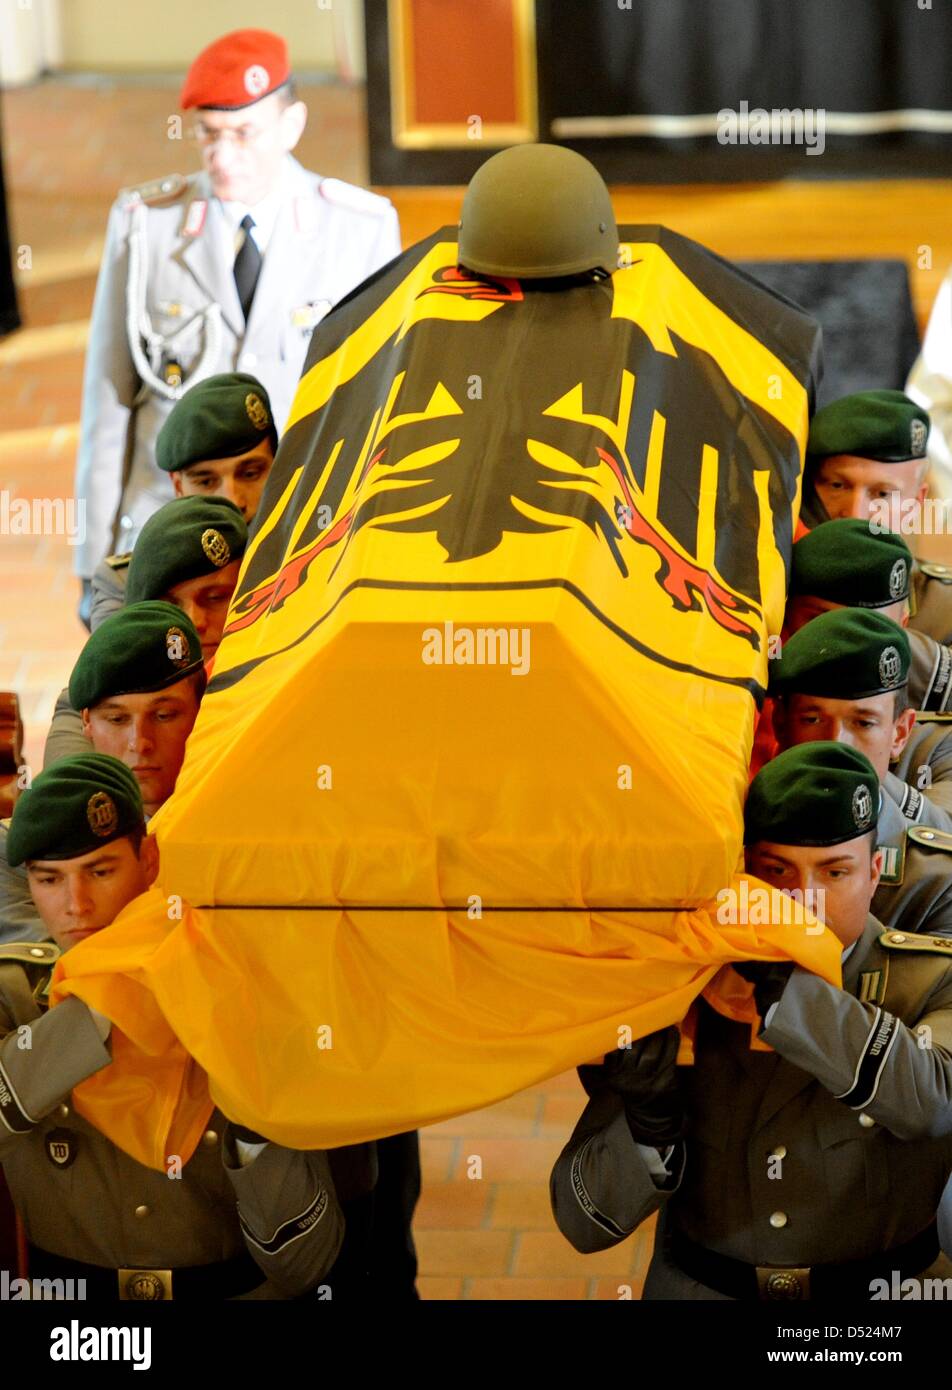 Bundeswehr (German military) paratroopers carry the coffin of staff sergeant Florian Pauli out of the St. Lamberti church after the funeral service in Selsingen, Germany, 15 October 2010. The 26-year-old German paratrooper was killed by a suicide bomber's explosive device in Afghanistan's Baghlan province on 8 October 2010. Photo: Maurizio Gambarini Stock Photo